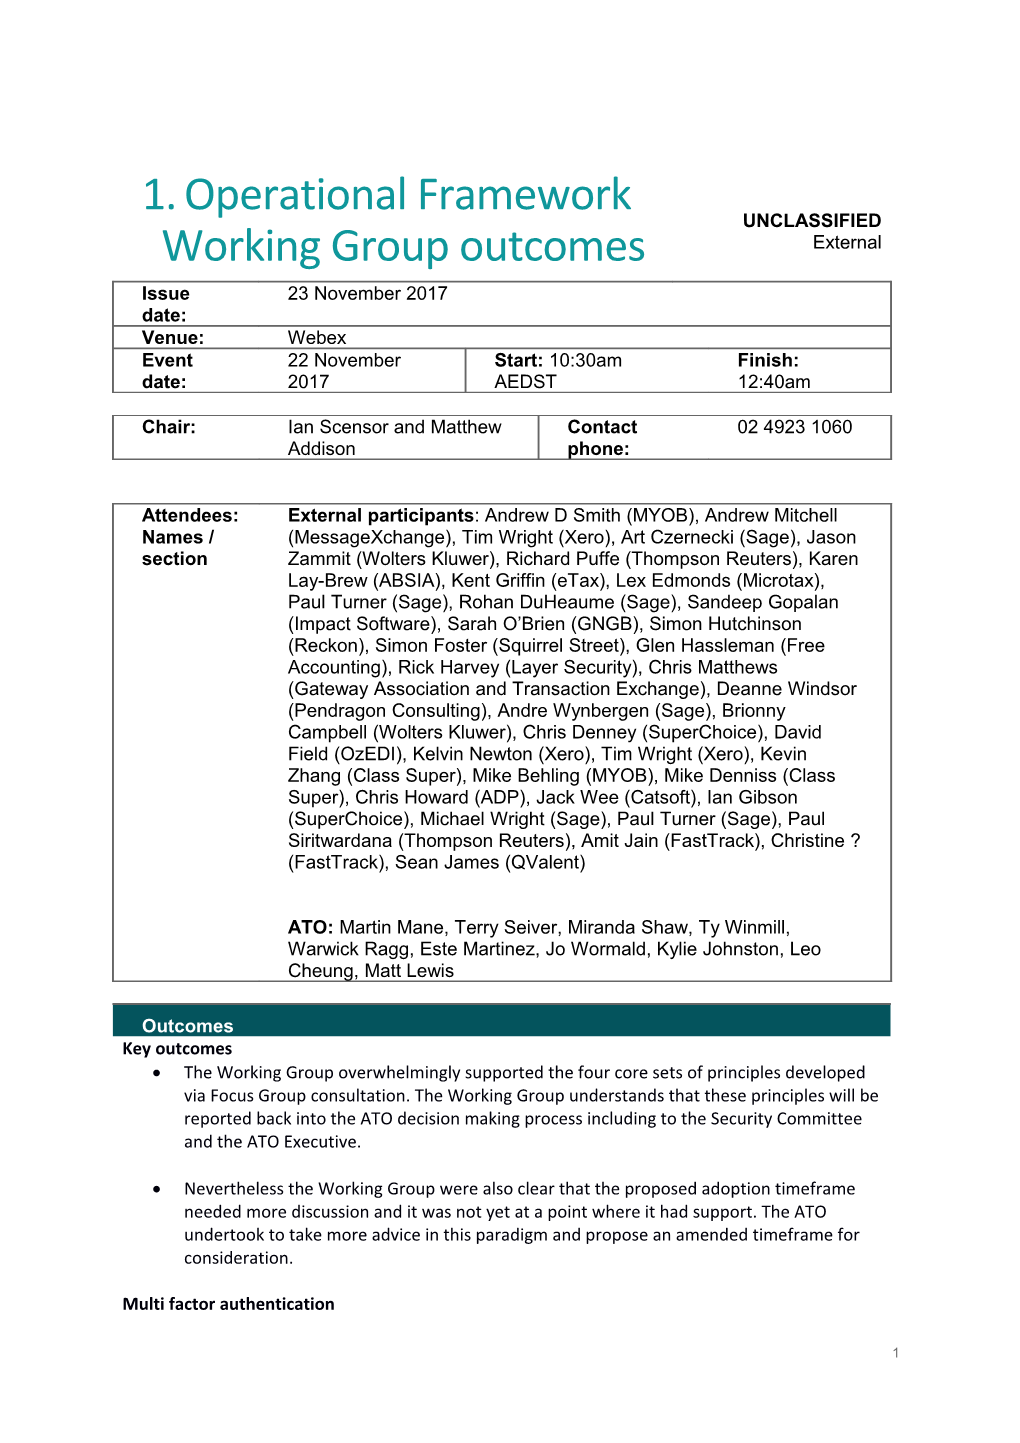 Operational Framework Working Group Outcomes